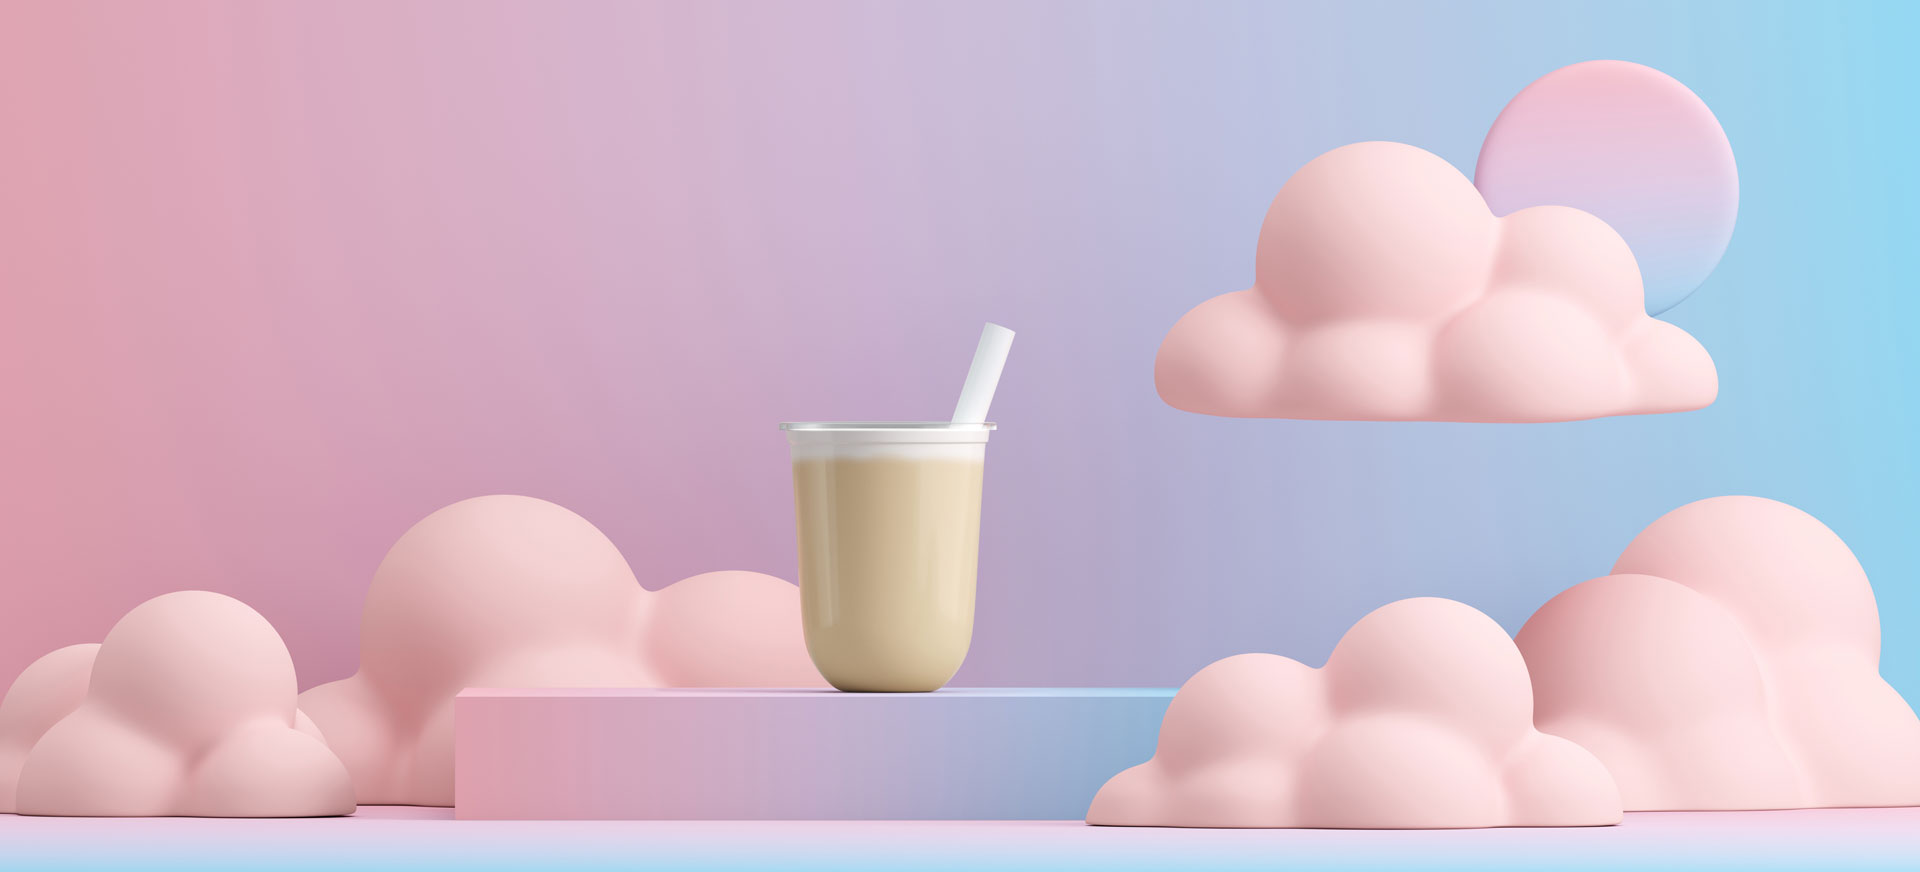 Soft blue and pink background with puffy pink clouds and cup of coffee in the middle with a straw